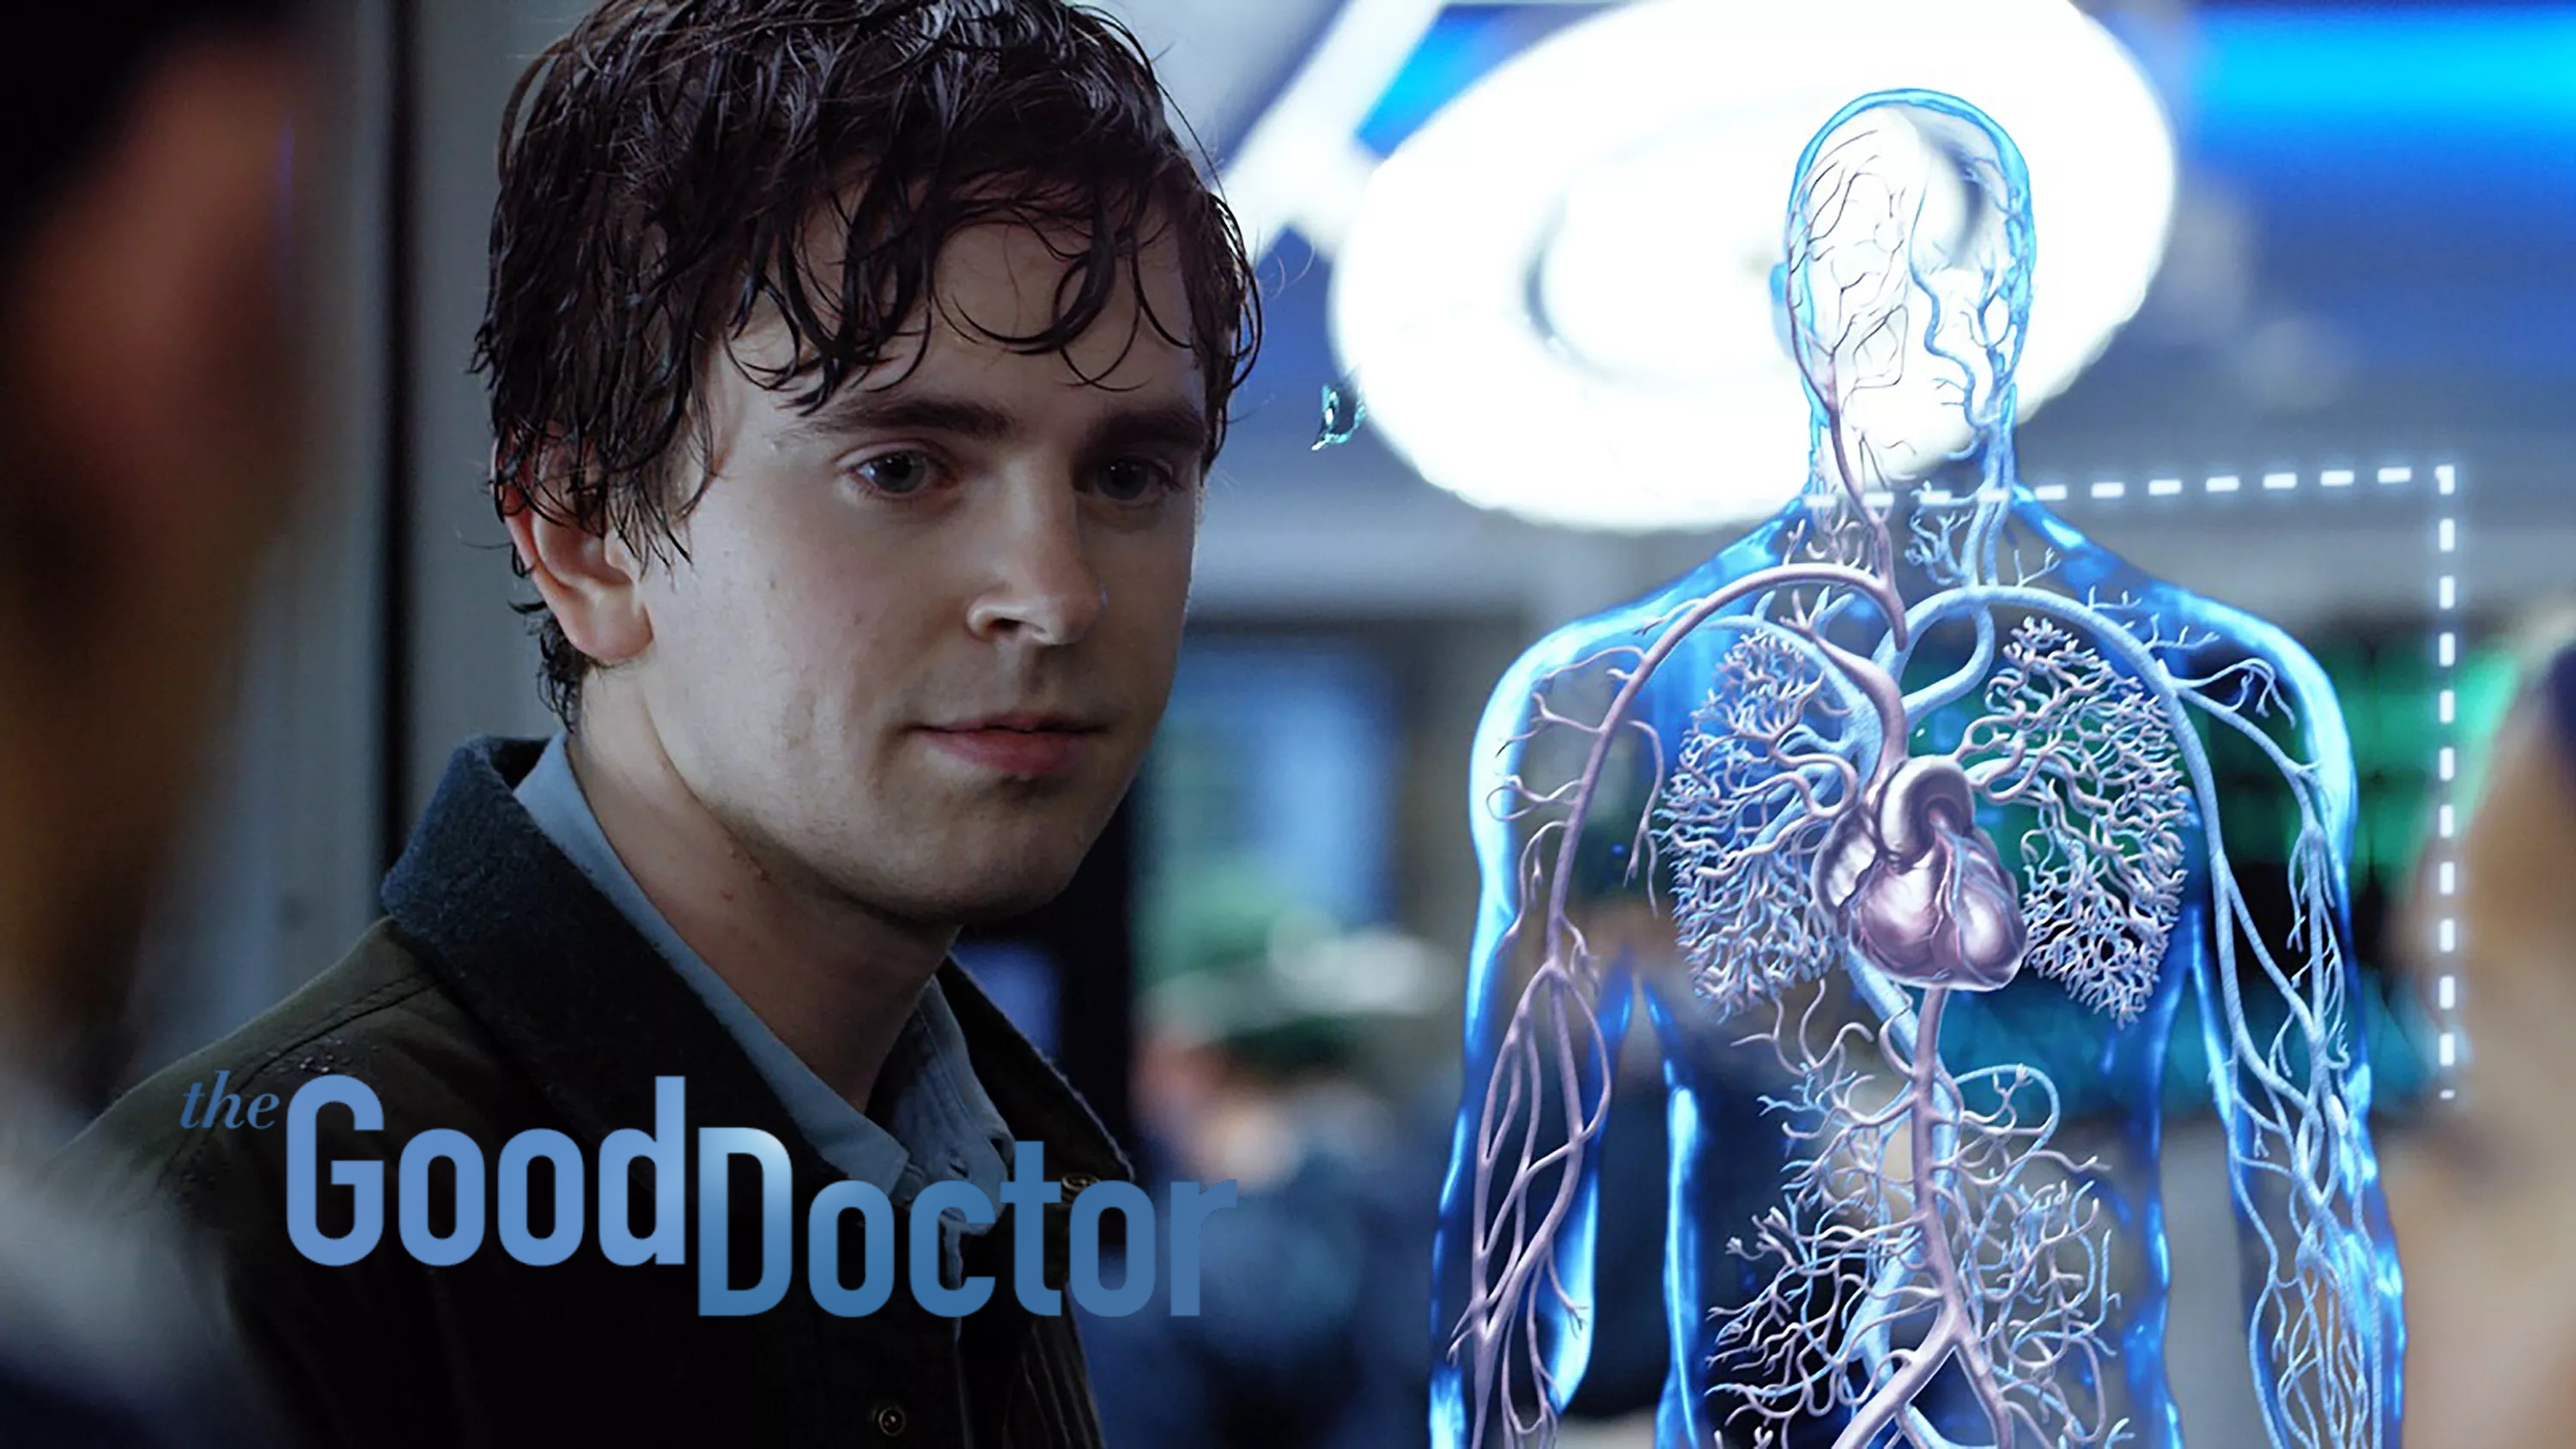  S rie TV The Good Doctor  Une nouvelle s rie m dicale